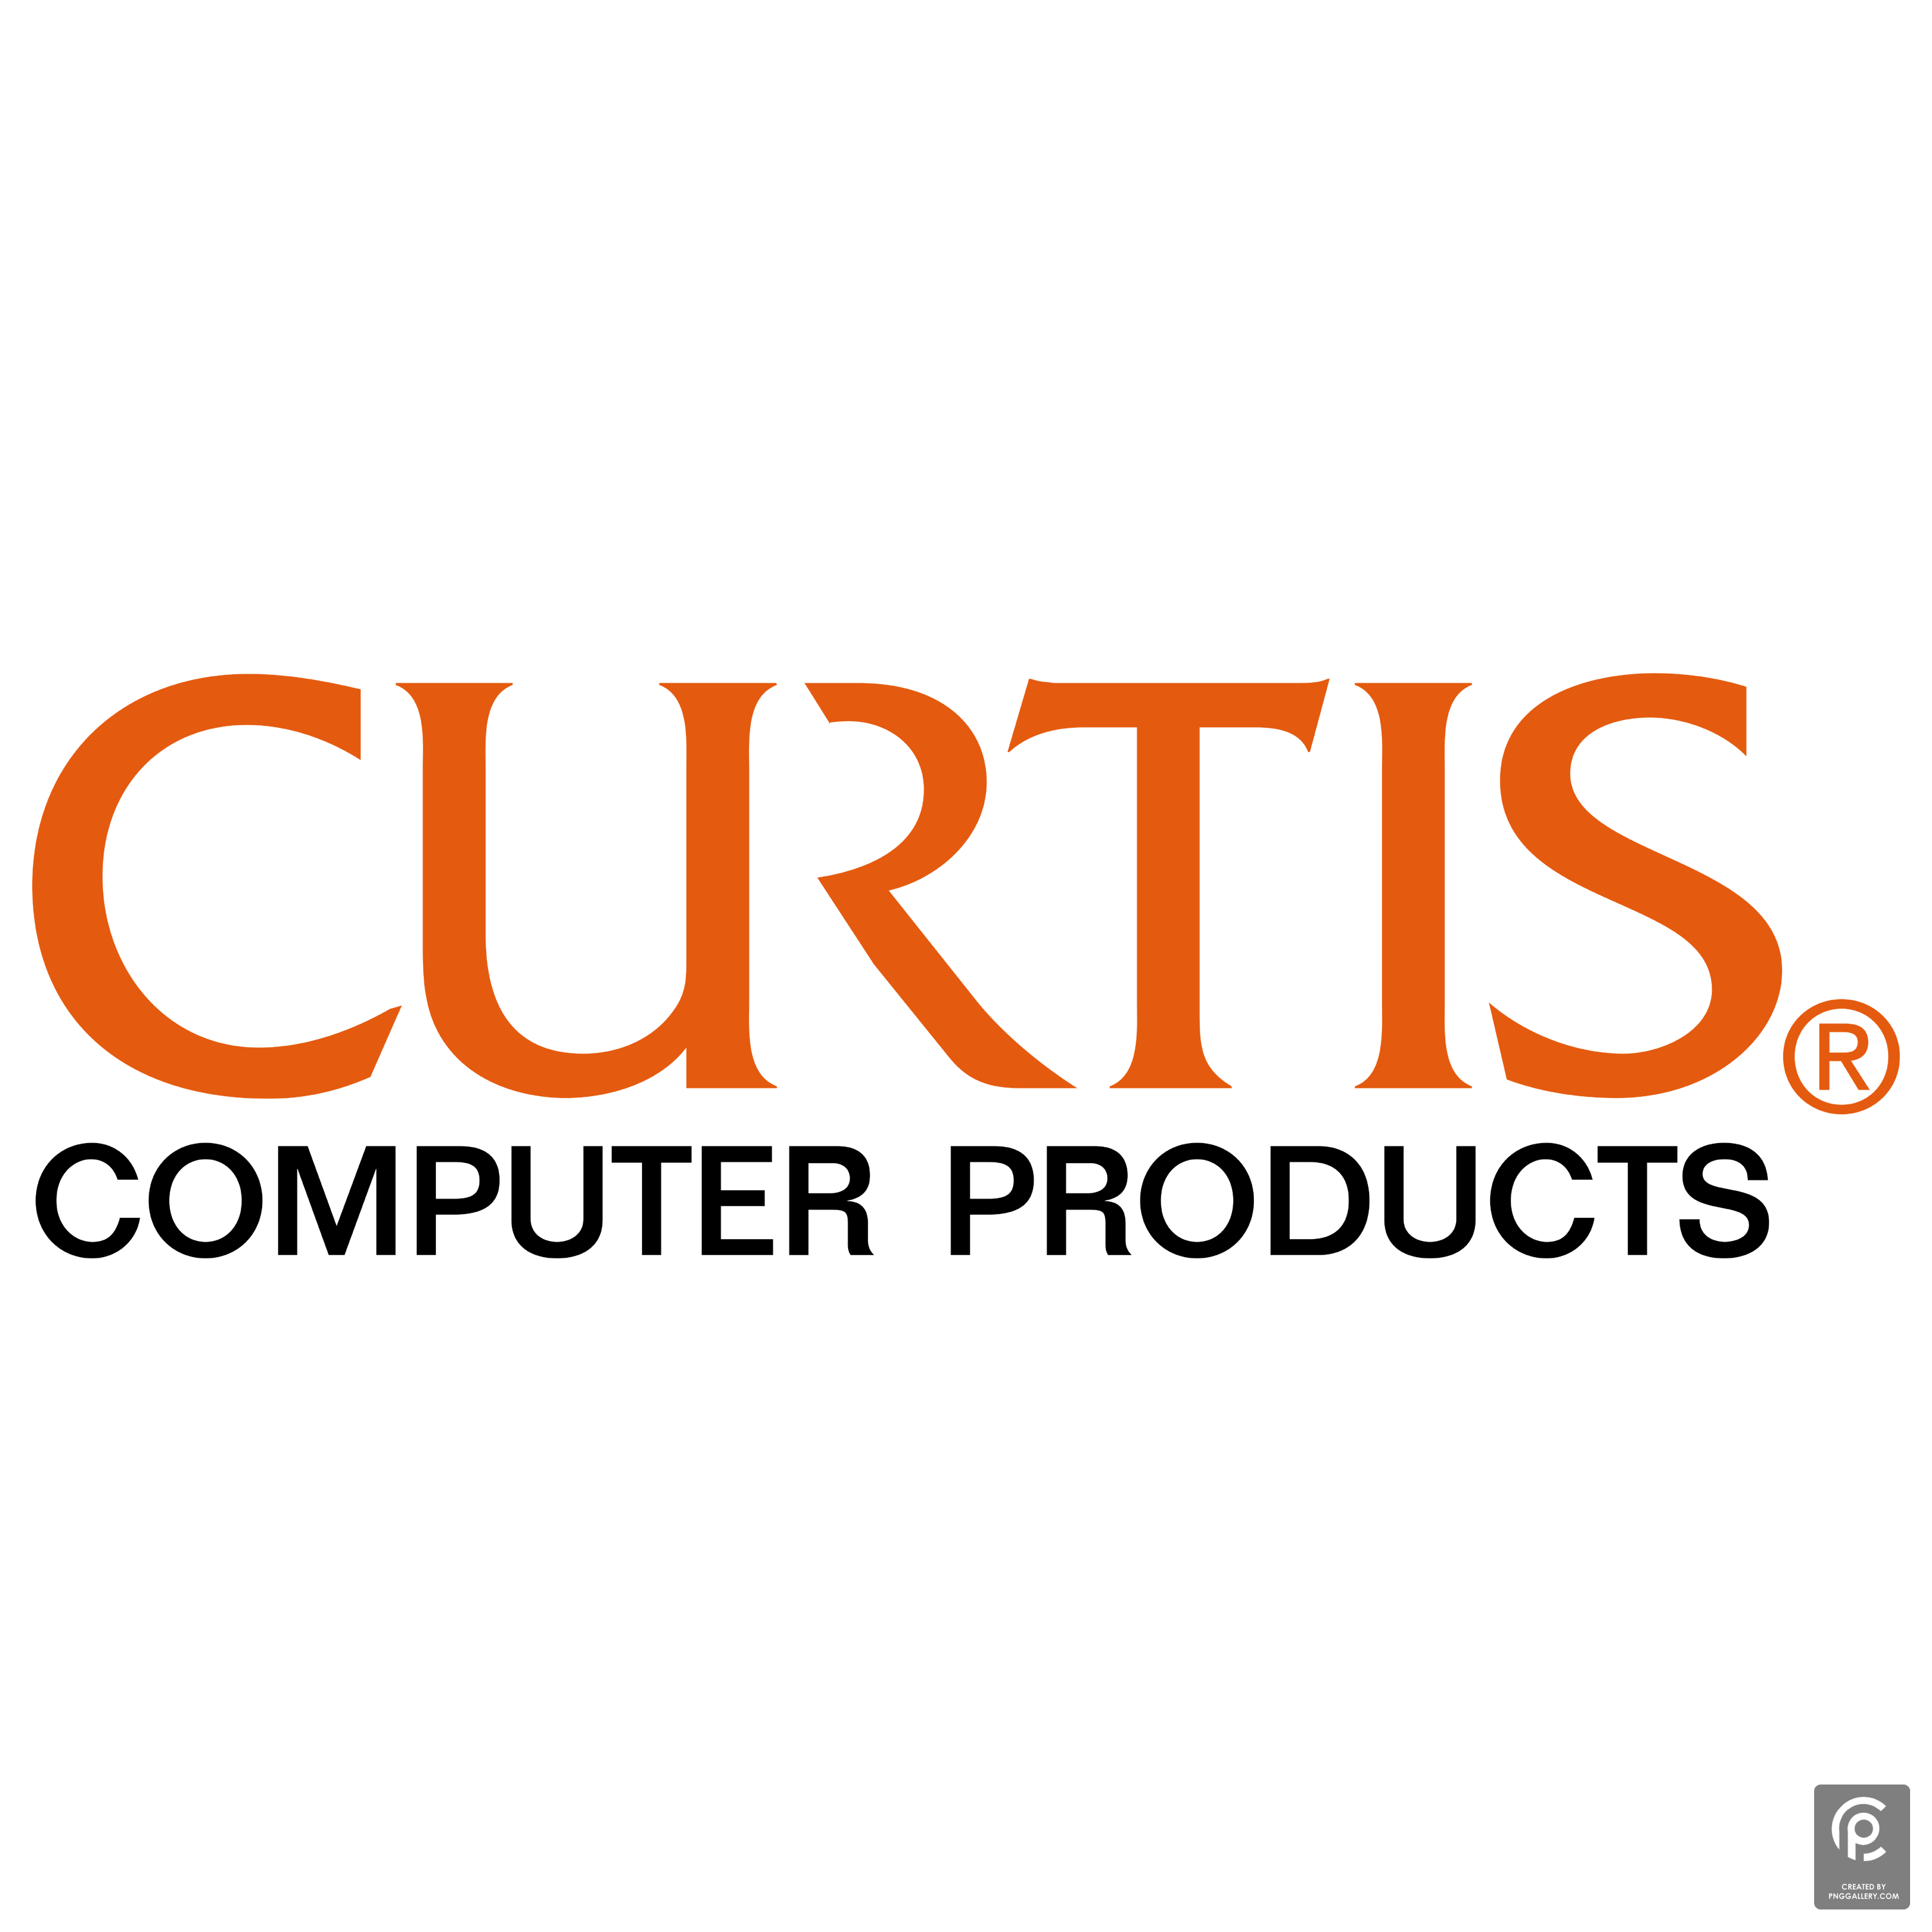 Curtis Computer Products Logo Transparent Picture